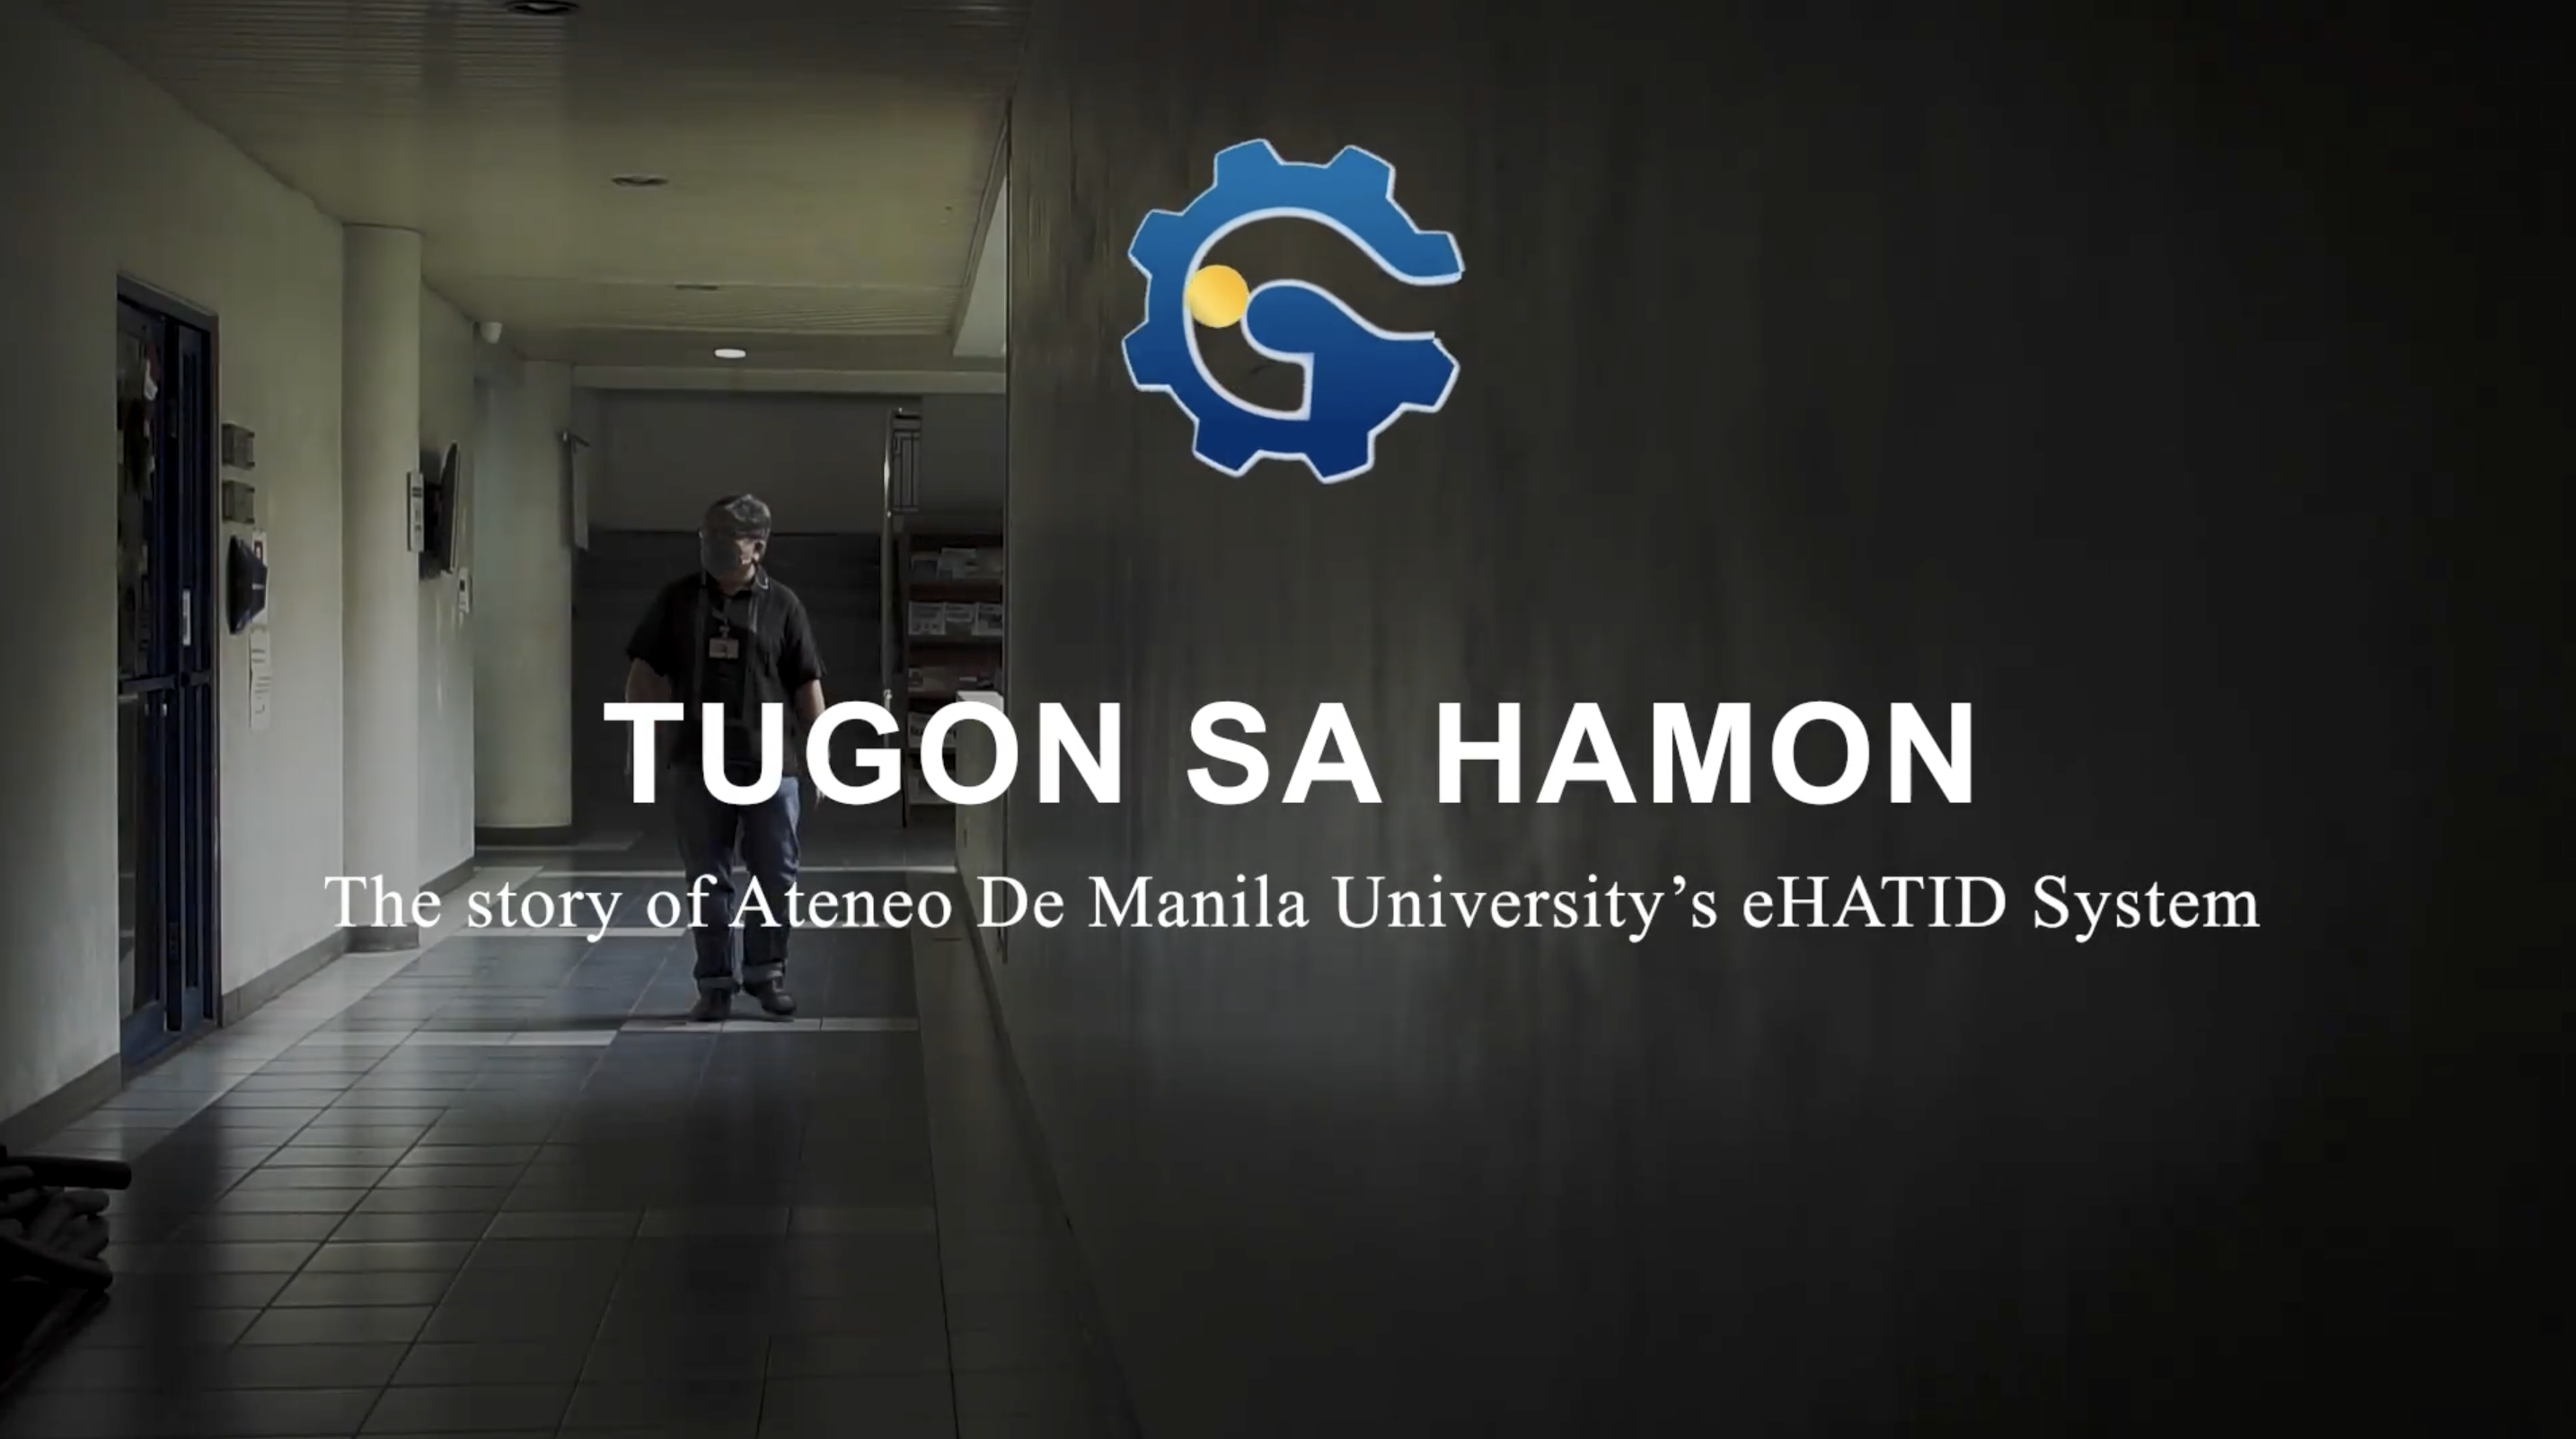 The eHATID won the People’s Choice Award through its video titled “Tugon sa Hamon” featured in the TECHNiCOM Awards 2021 Facebook page. 